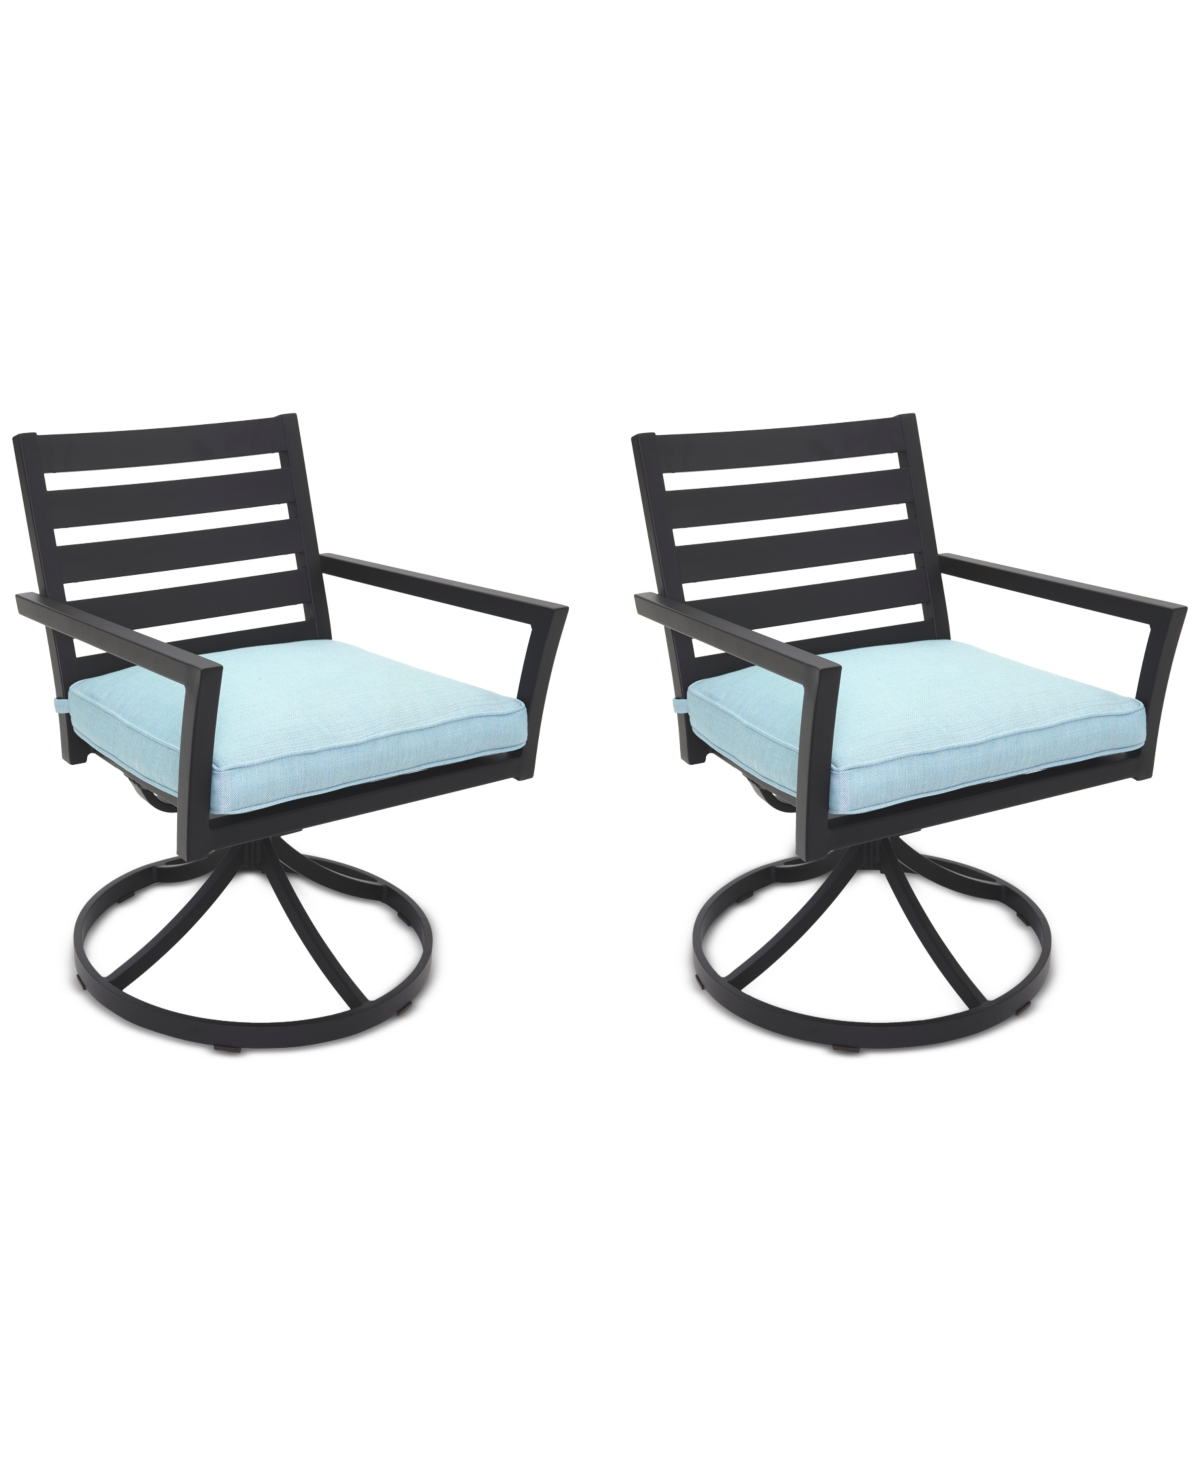 Agio Astaire Outdoor 2-pc Swivel Chair Bundle Set In Spa Light Blue